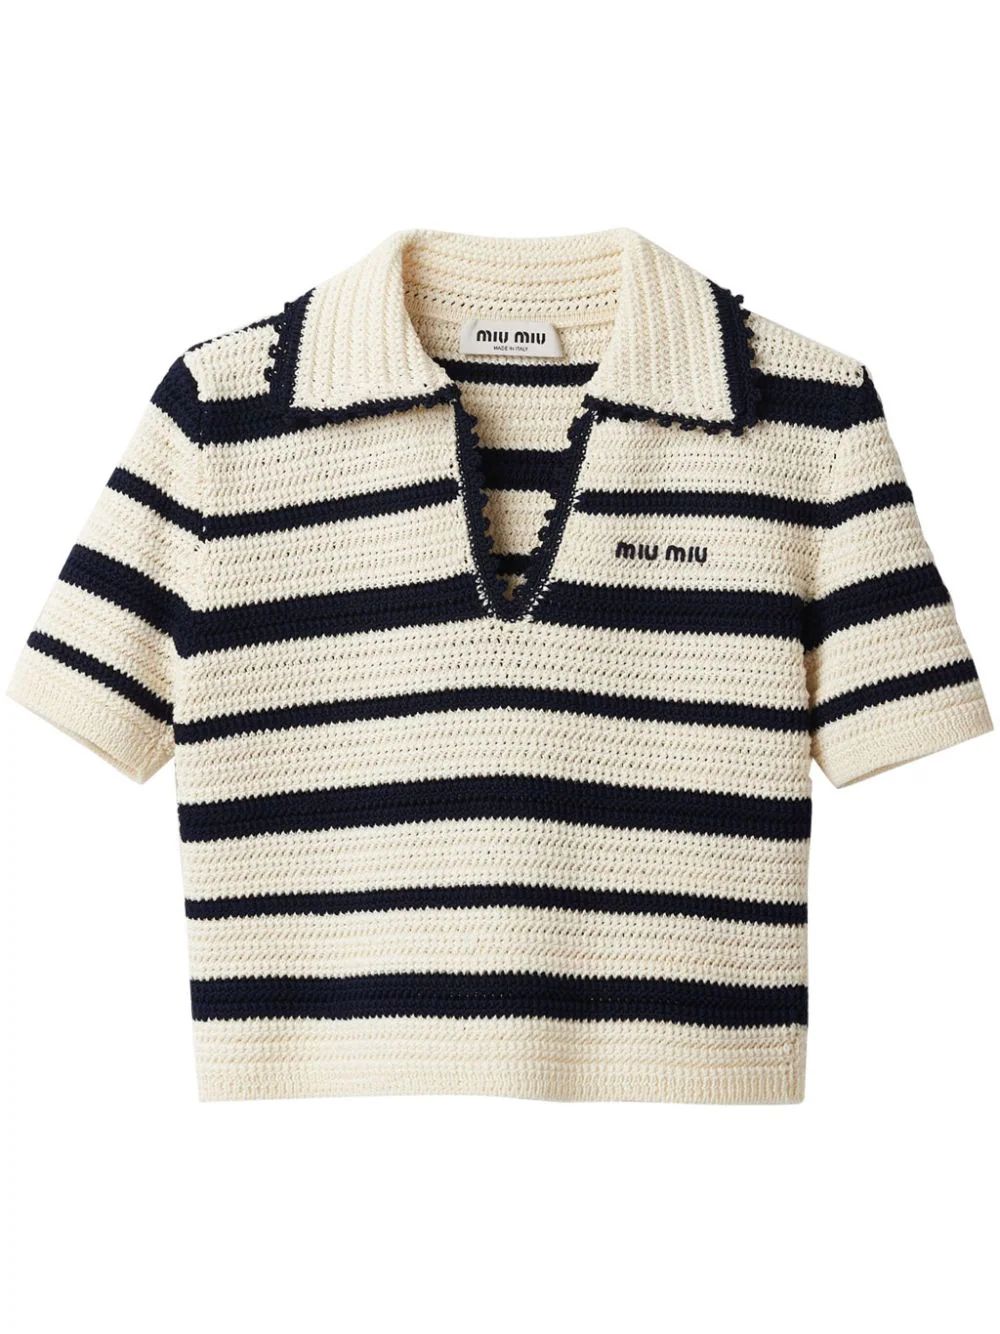 The DetailsMiu Miustriped knitted polo shirtHighlightswhite/midnight blue cotton knitted construc... | Farfetch Global